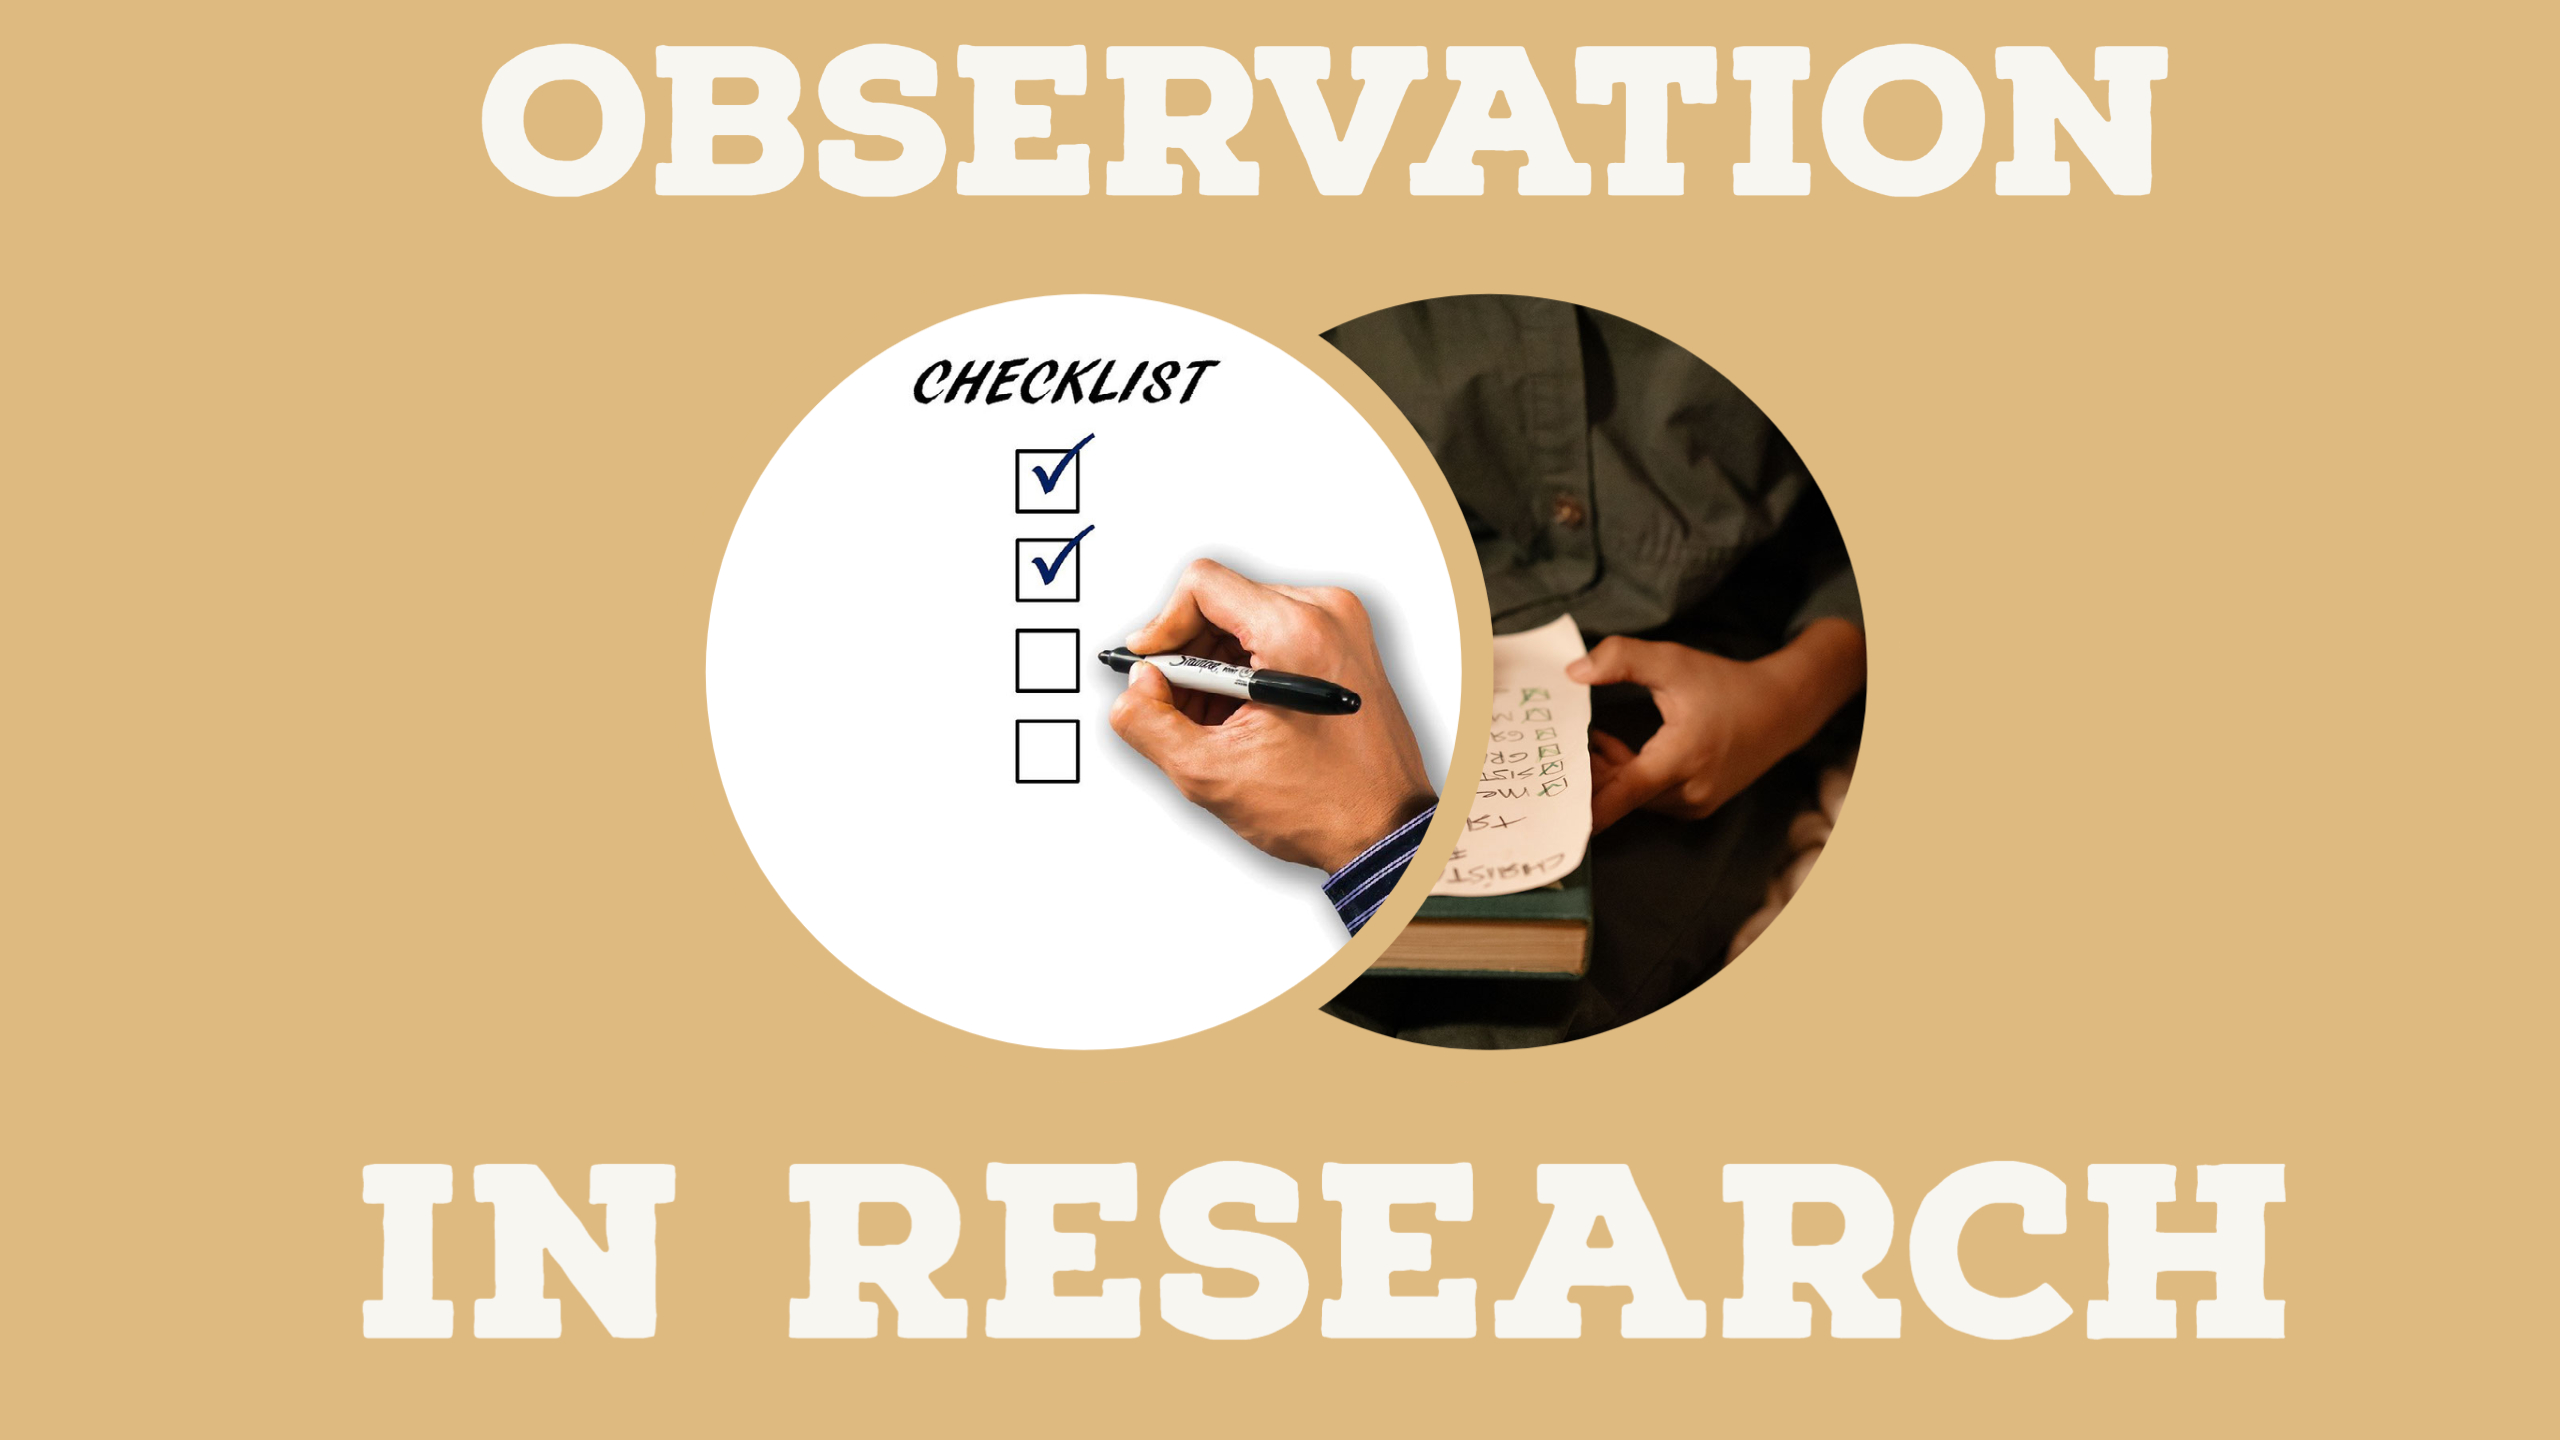 direct observation qualitative research